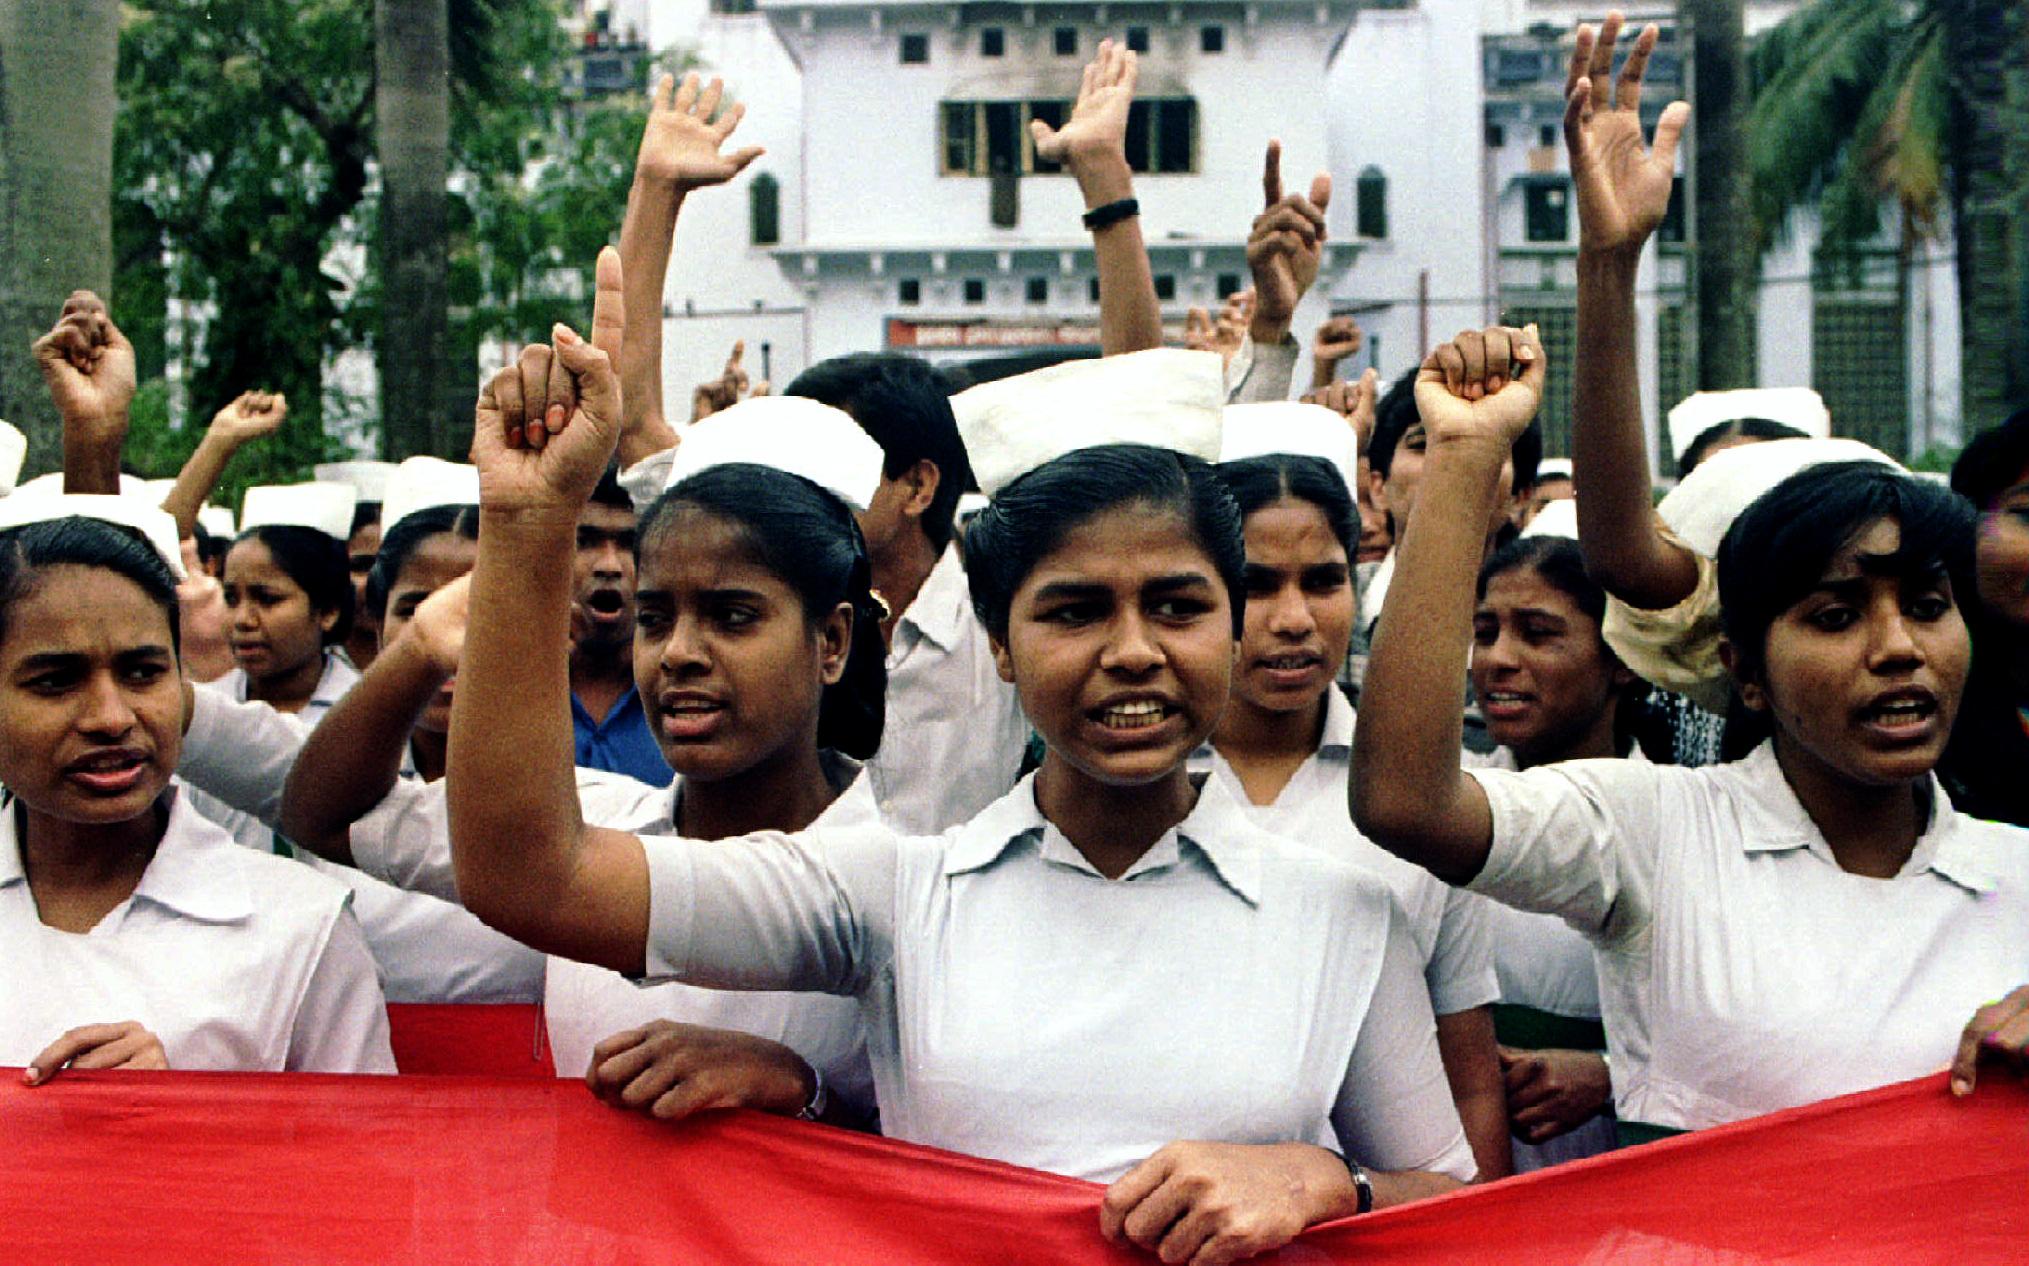 Nurses in white hats and uniforms raise their fists and hold a red banner in front of a white administration building in Dhaka, Bangladesh on February 16, 1995.